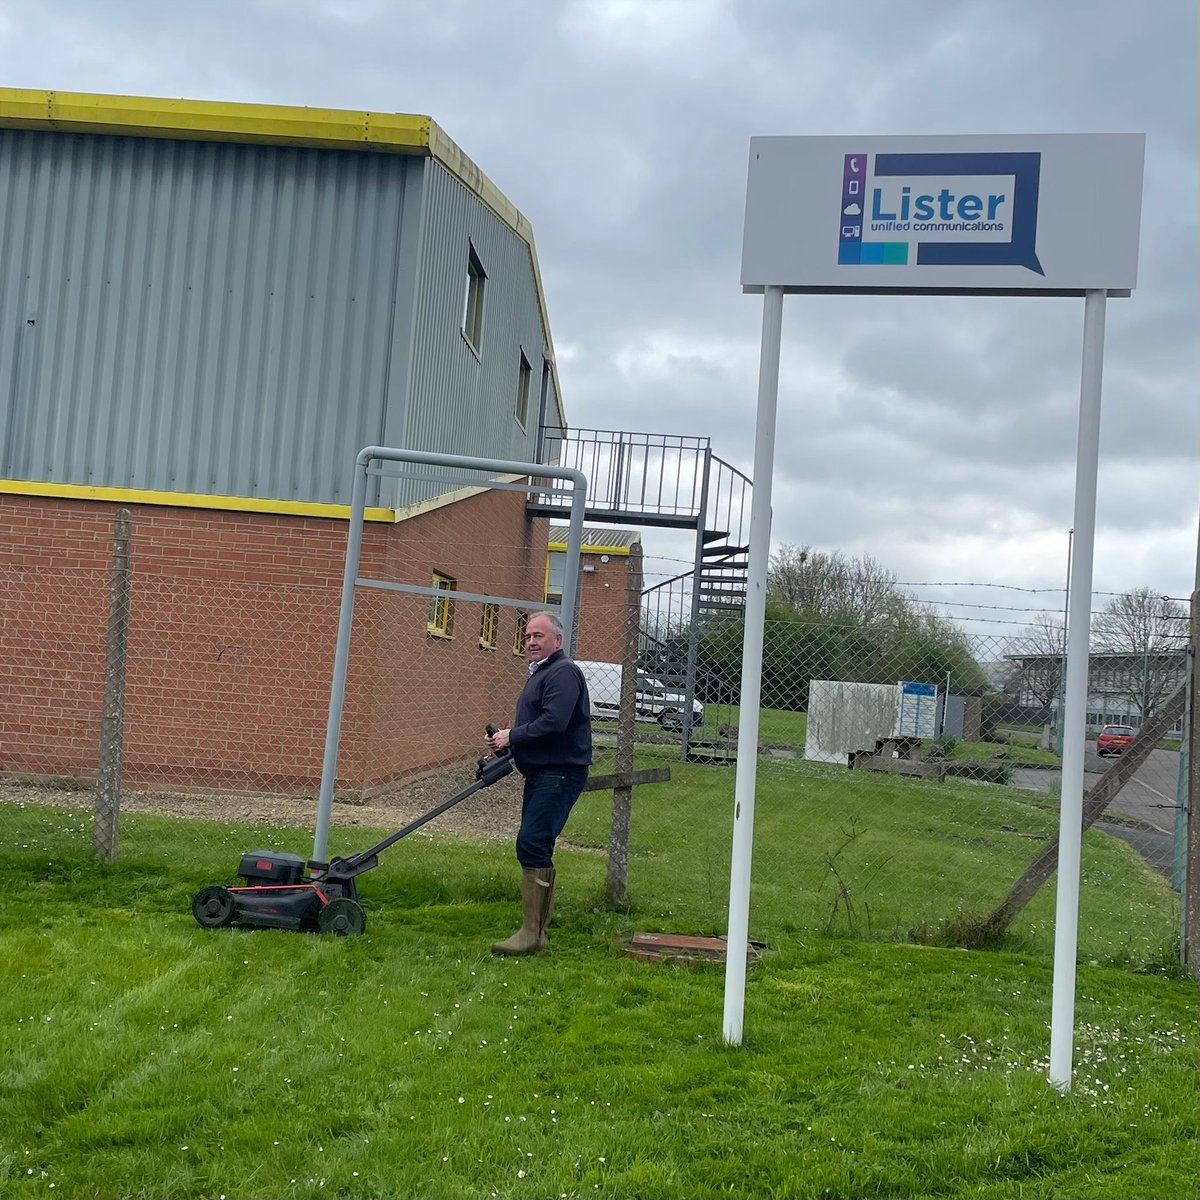 It doesn't matter who you are the lawn still needs mowing! Doesn't it Rob Lister!? and with an E-mower 👍